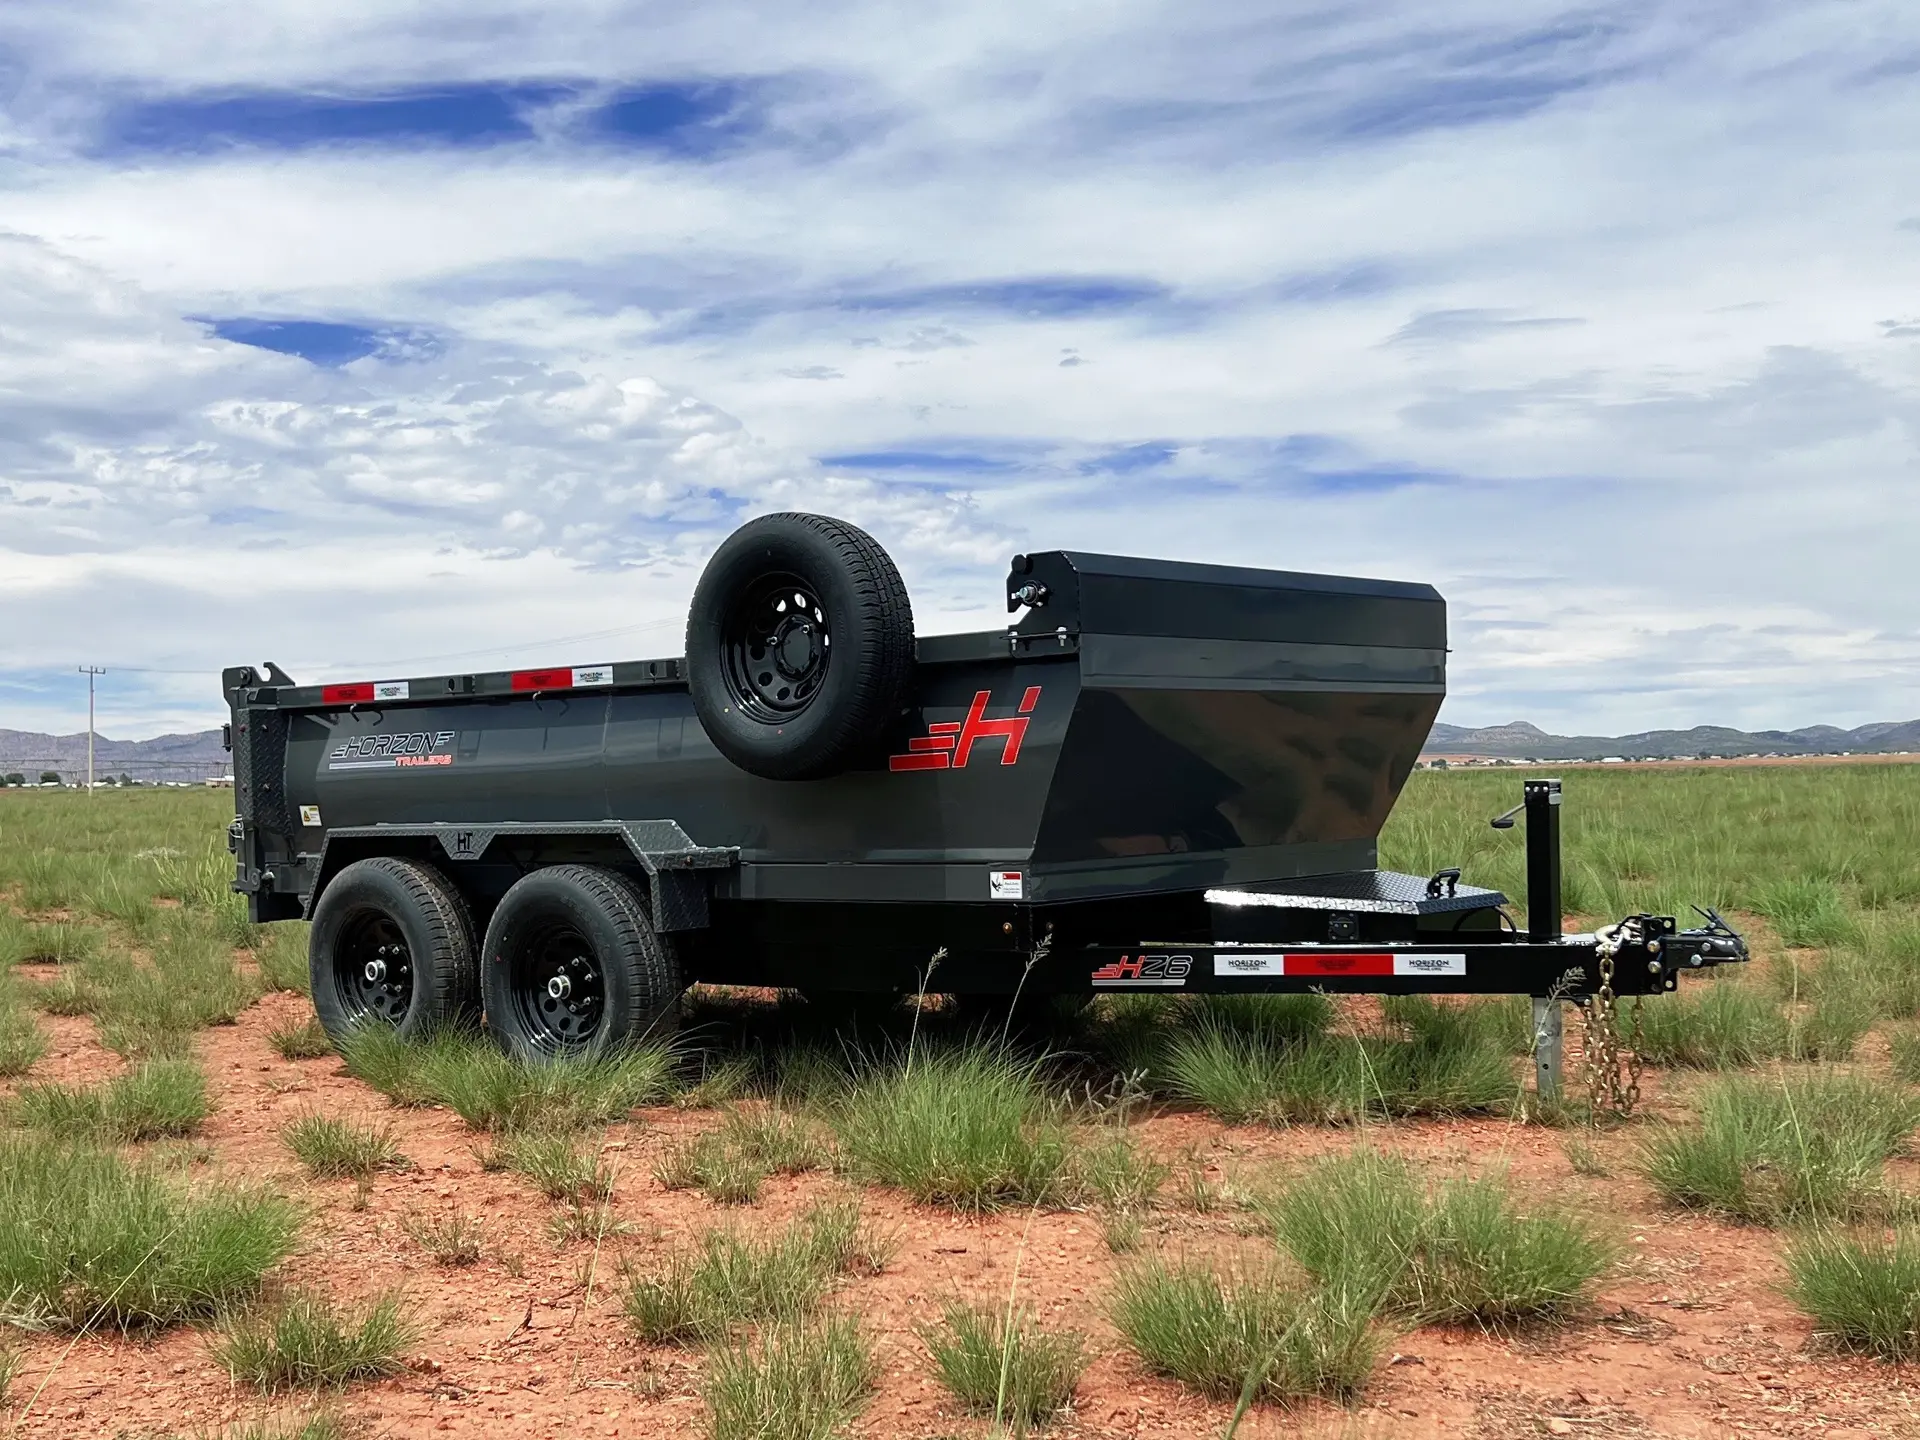 Small dump trailer with rounded sides the HZ6 Dump Trailer